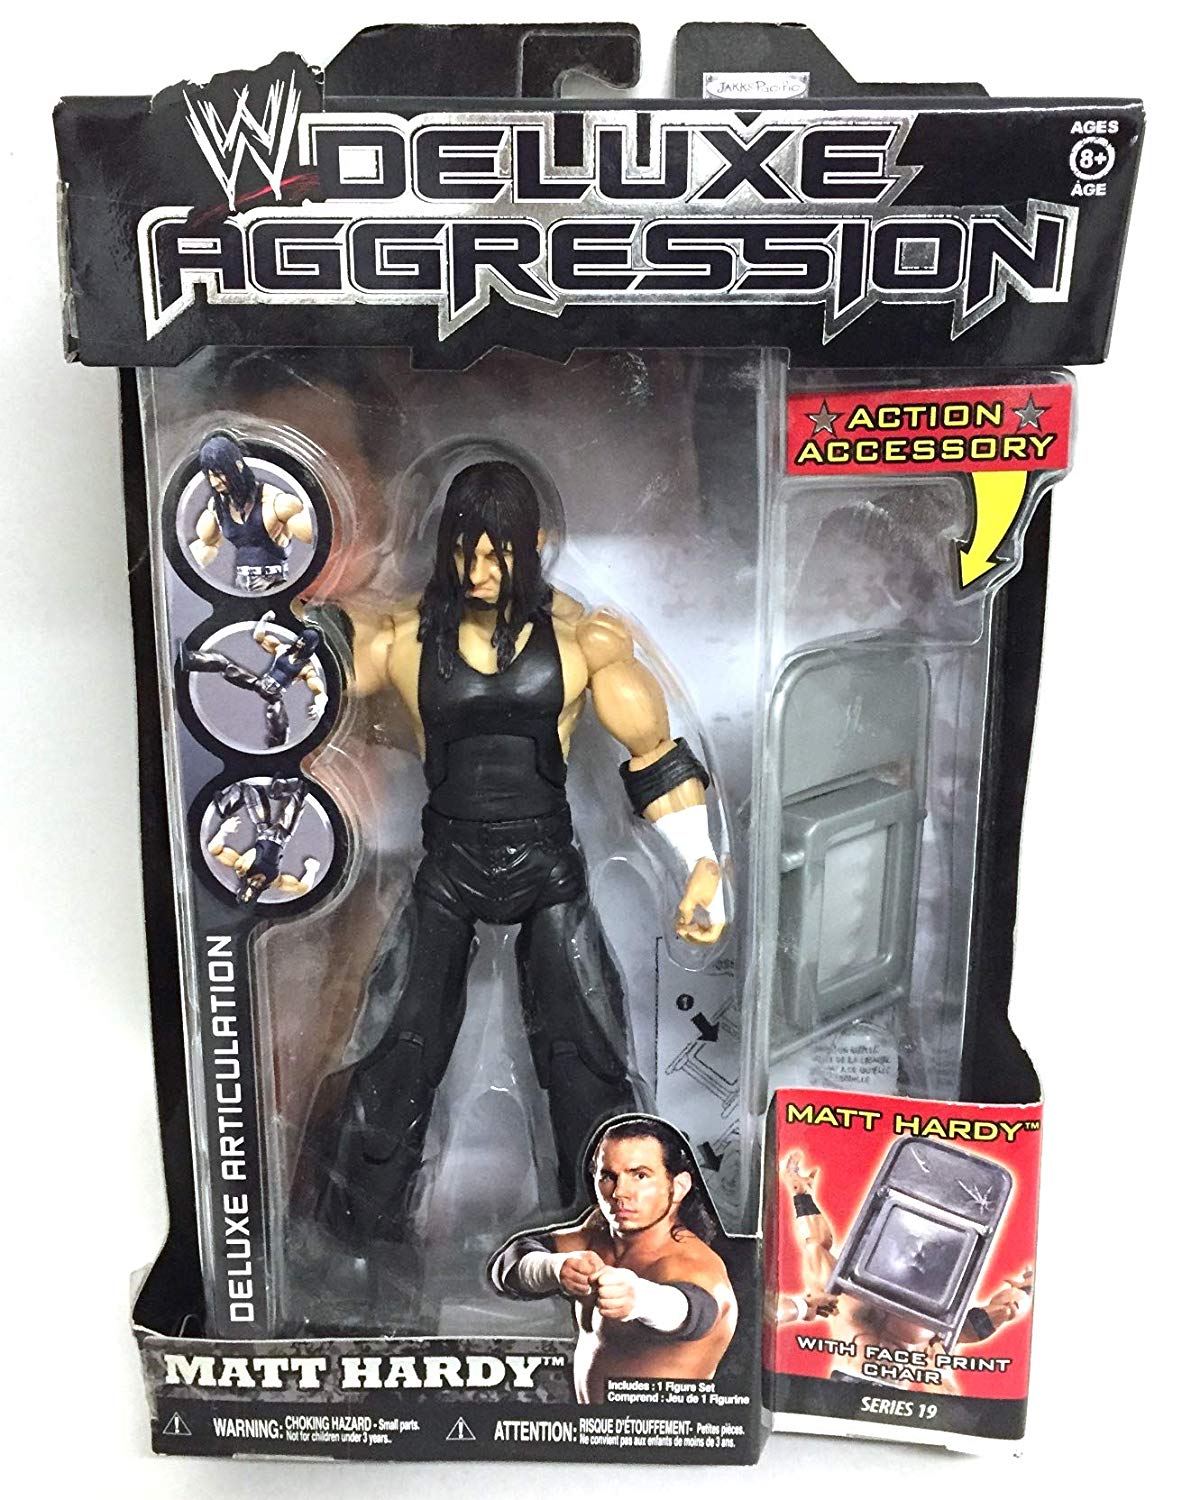 wwe deluxe aggression figures